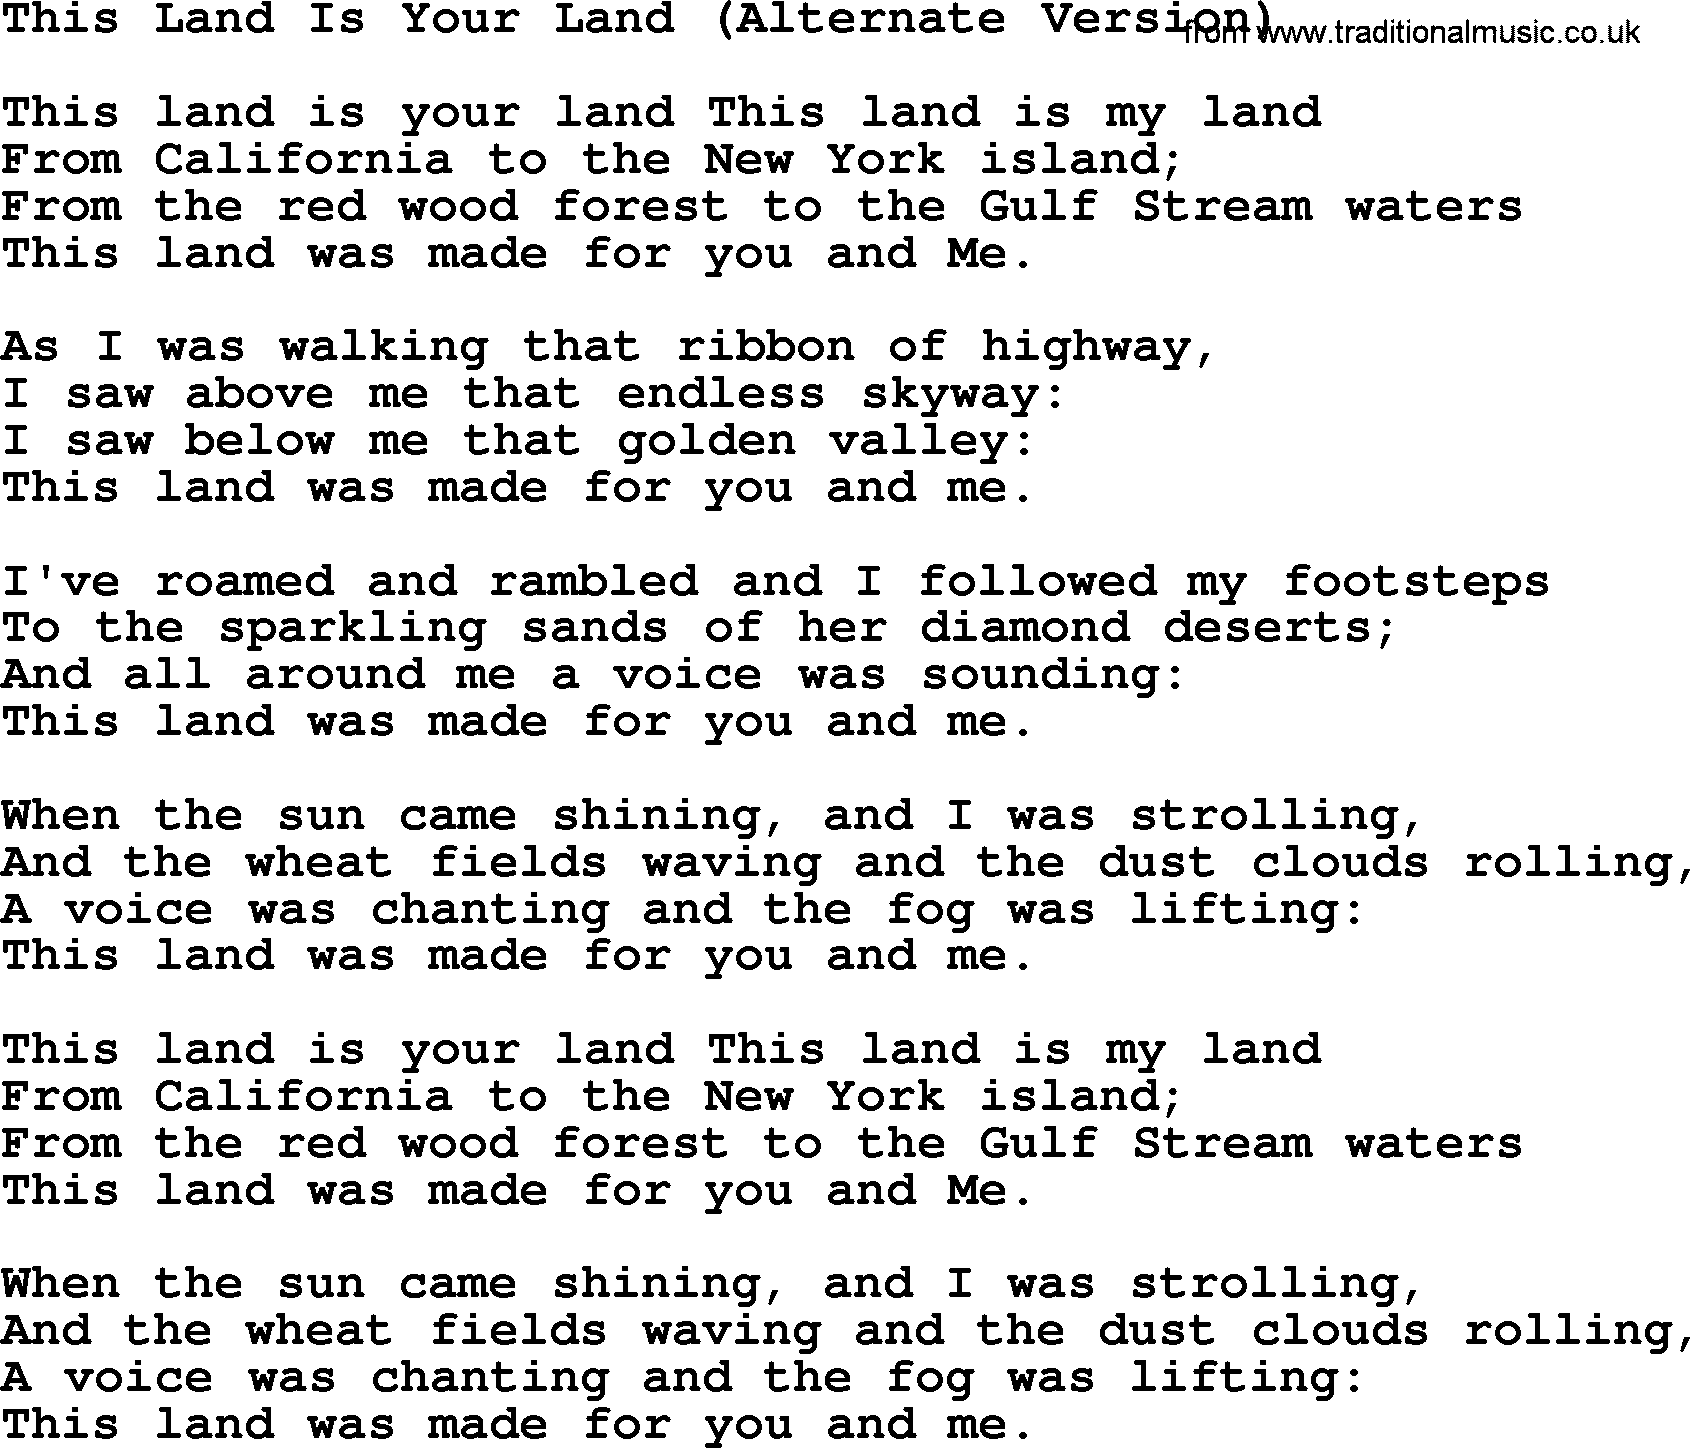 Woody Guthrie song This Land Is Your Land Alternate Version lyrics